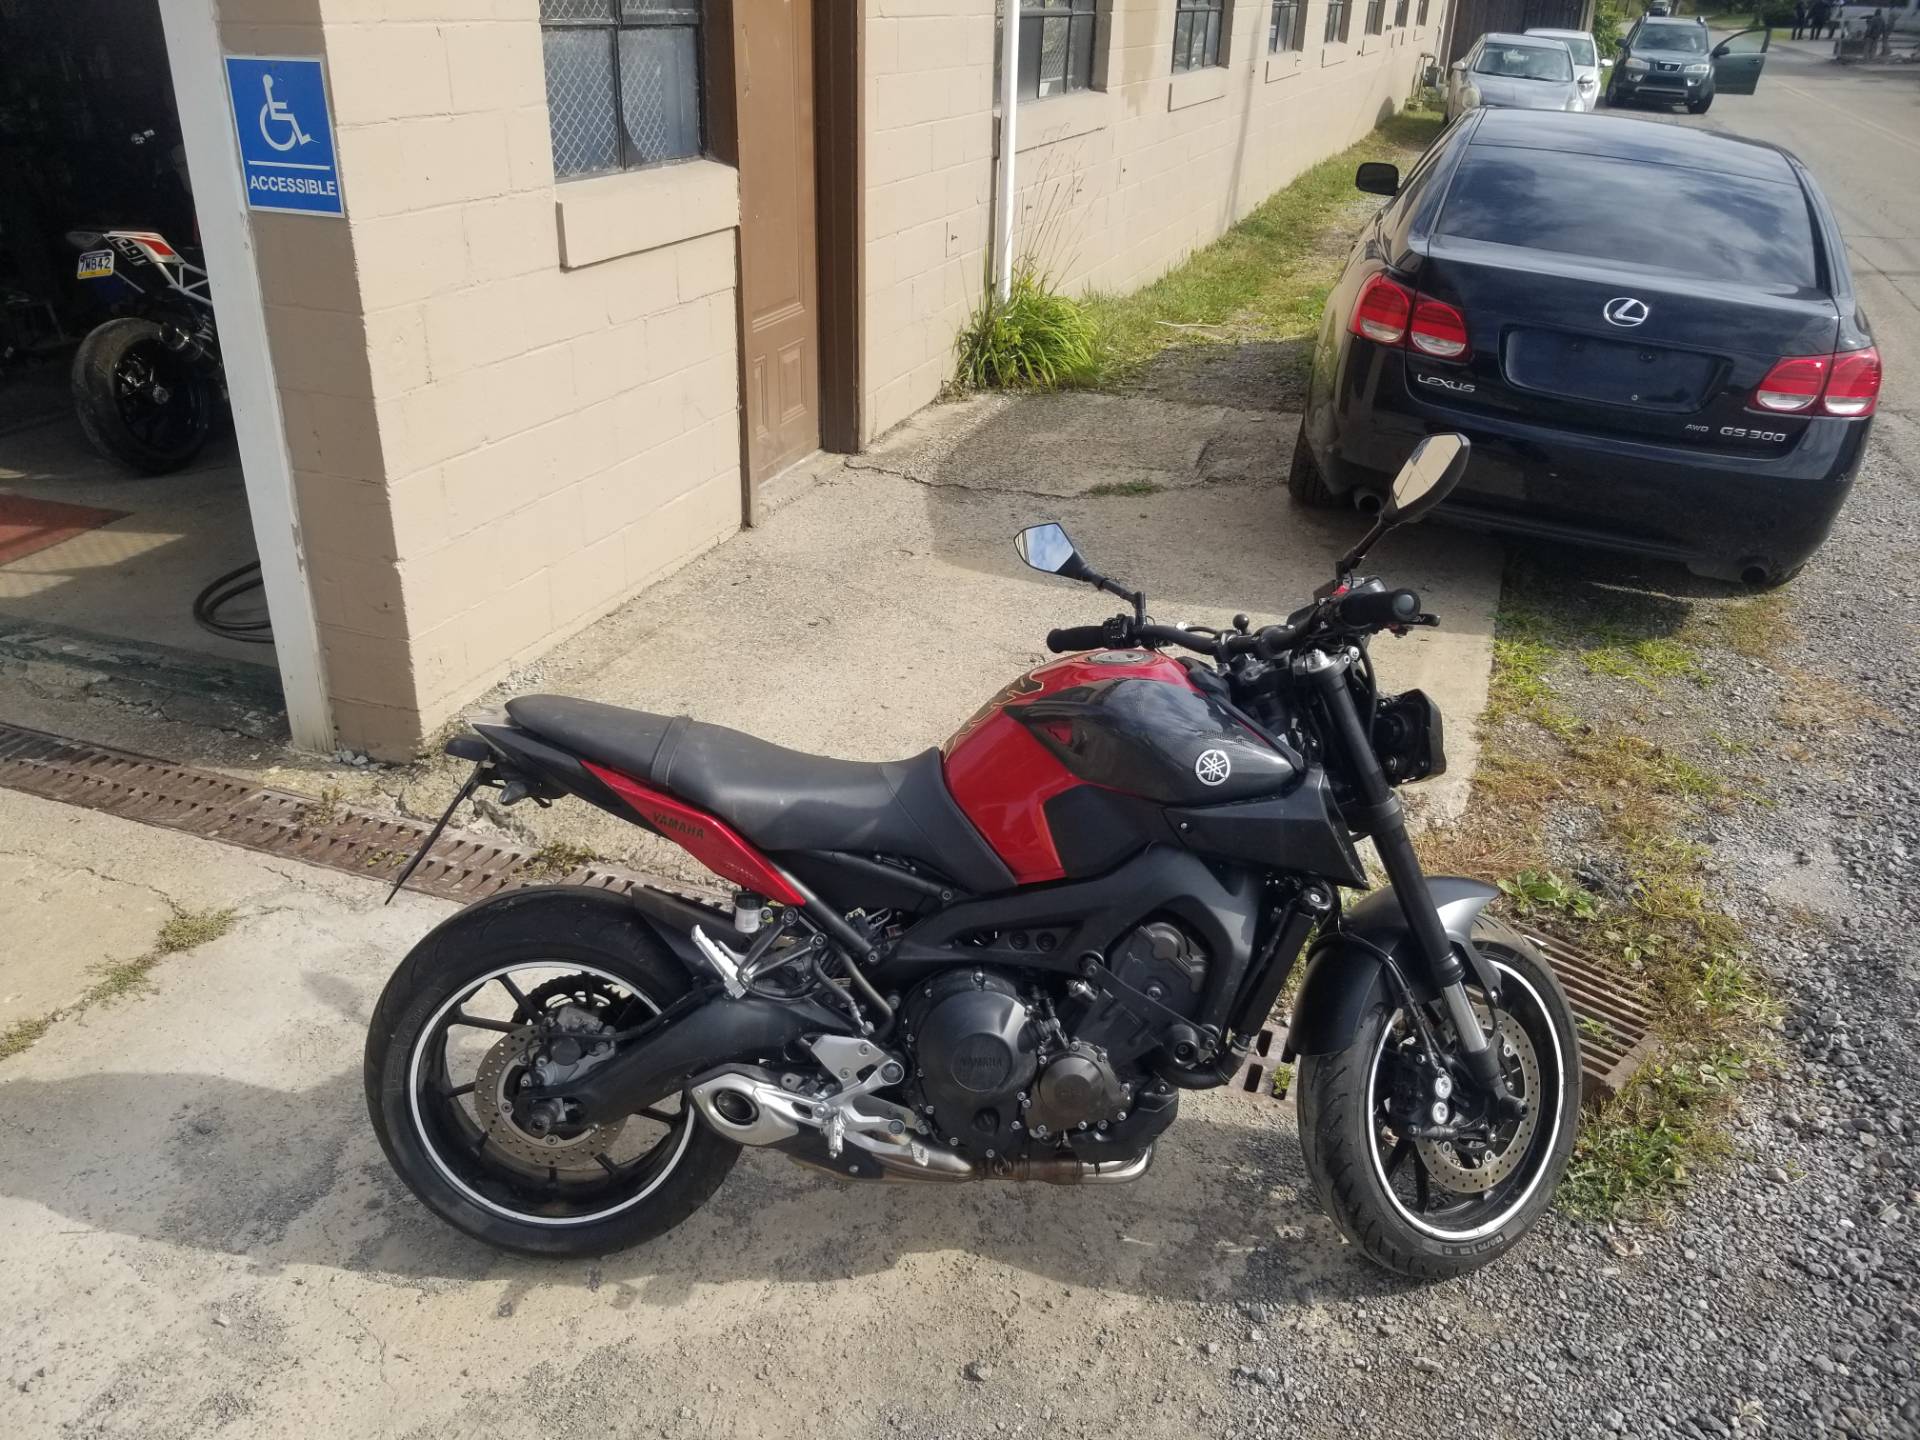 2017 FZ09 MT09 FZ09 MT09 N/A - Click for larger photo